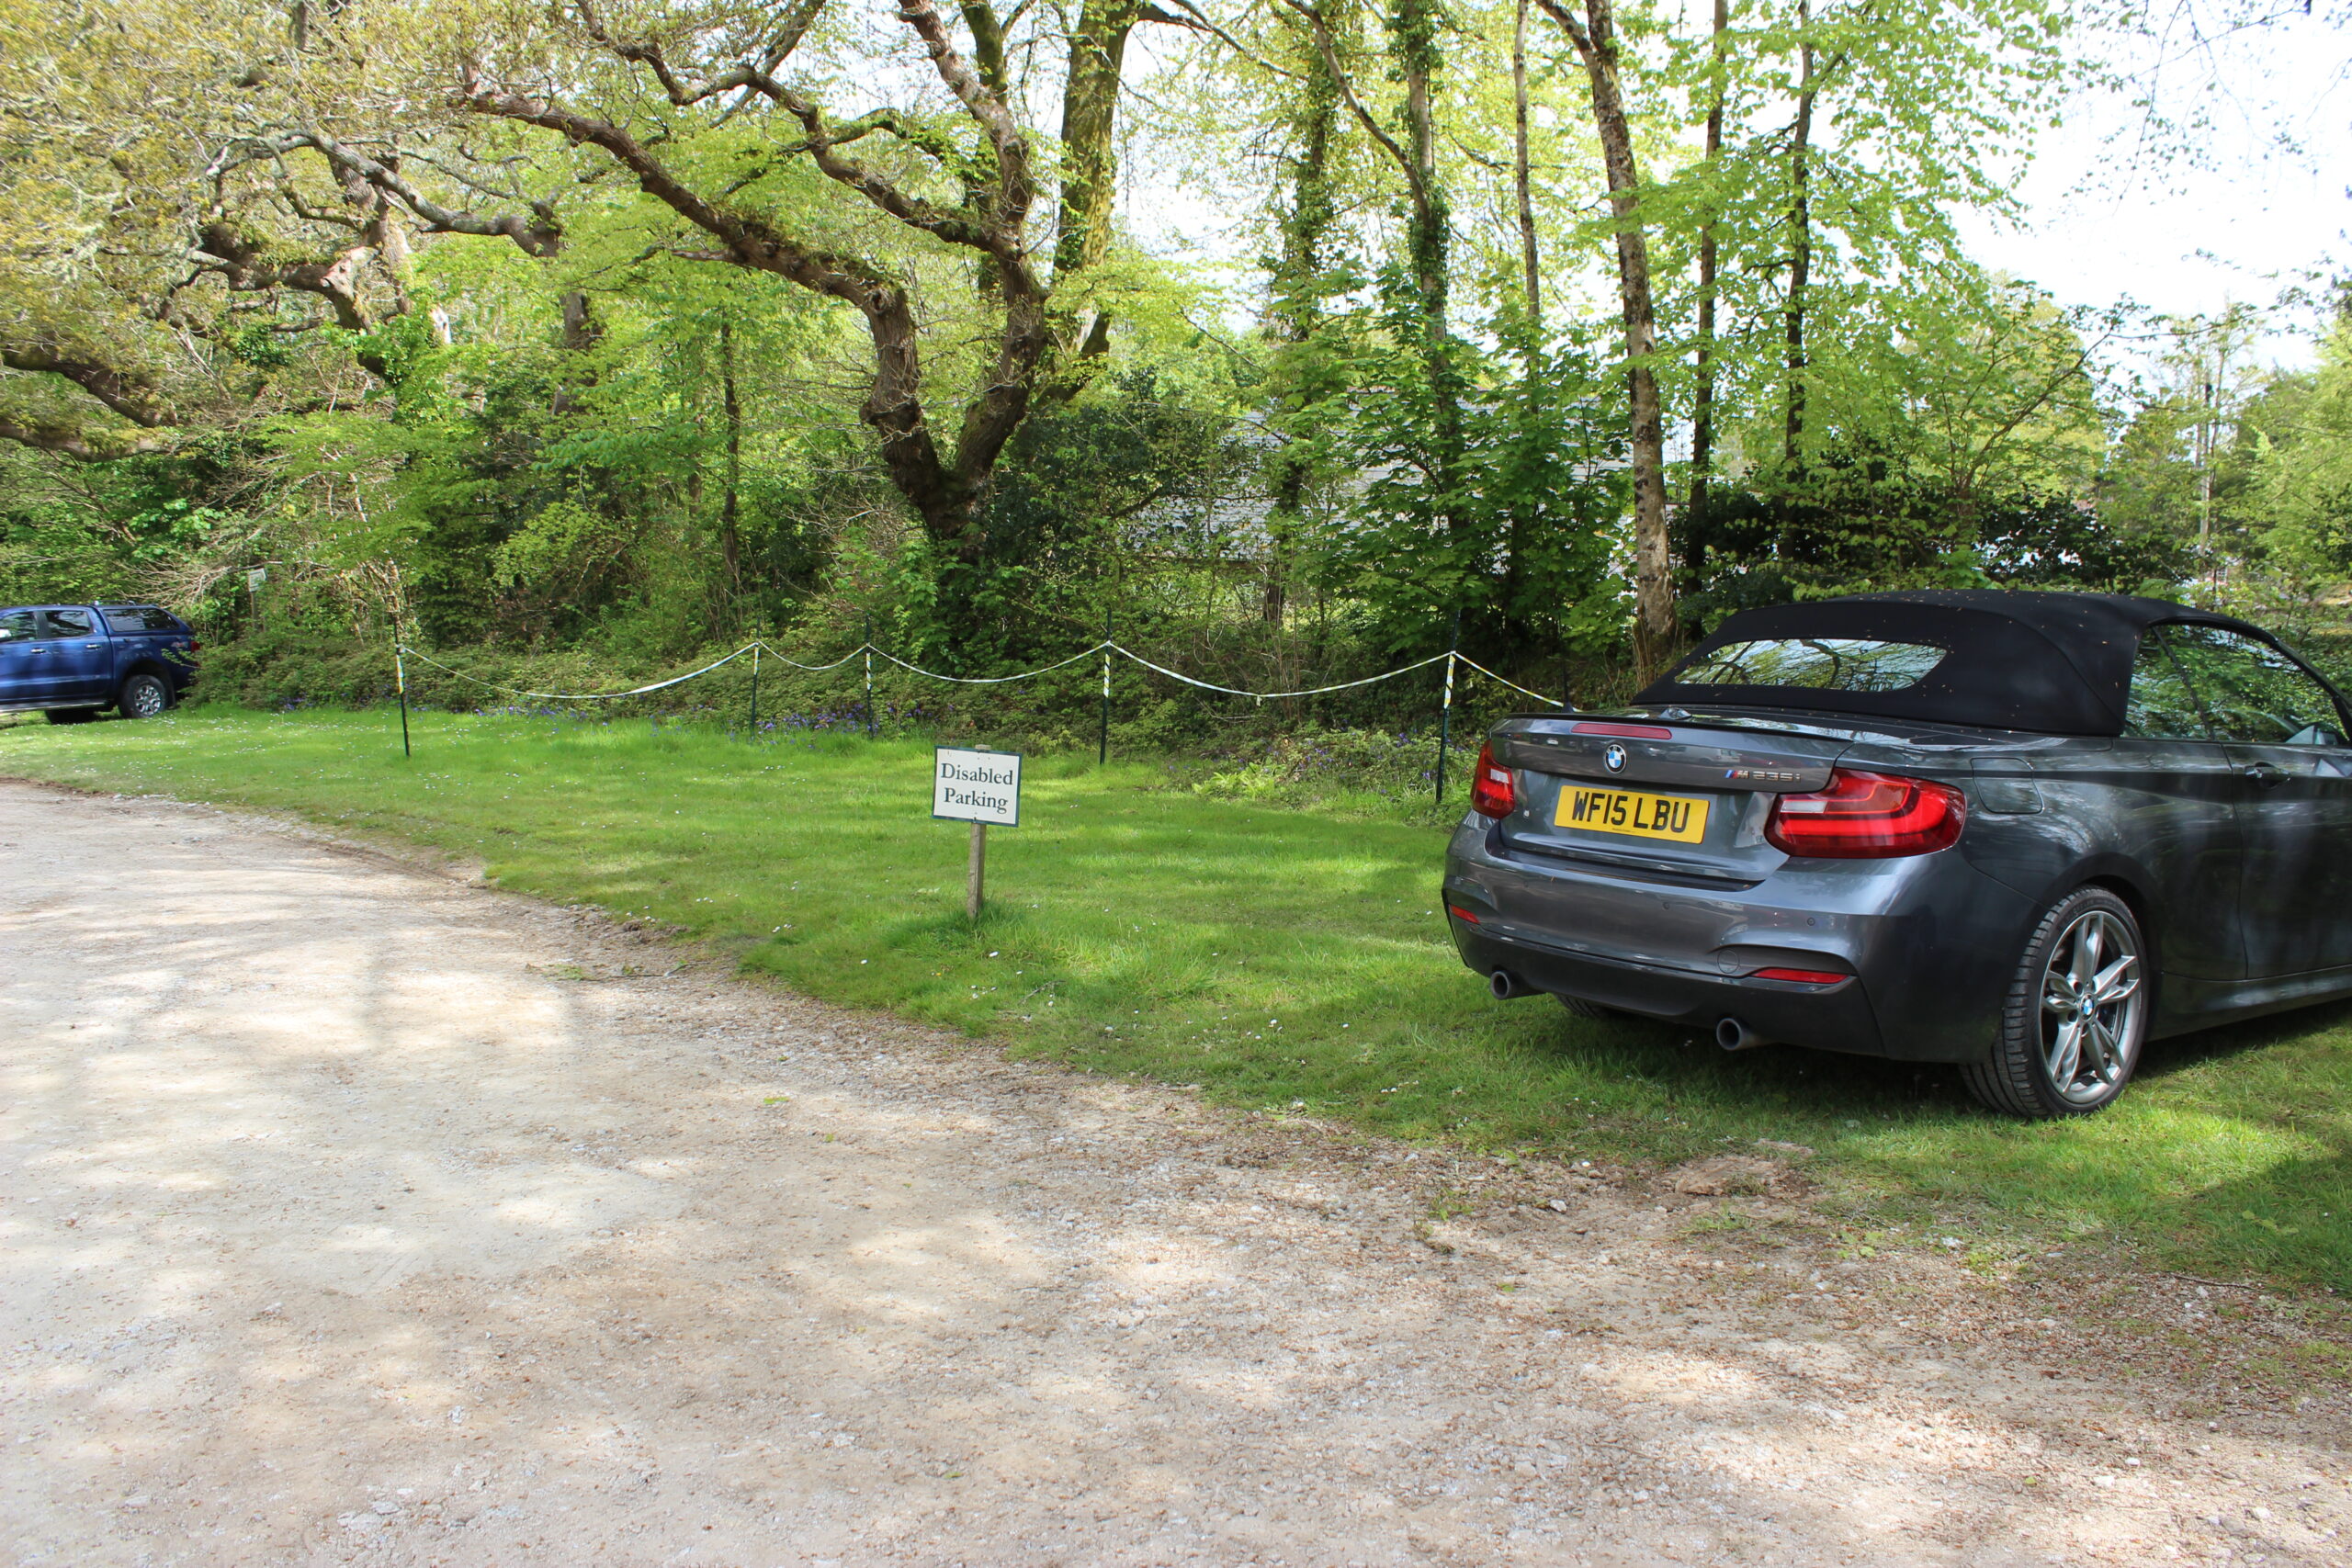 Accessible parking spaces at Enys Gardens